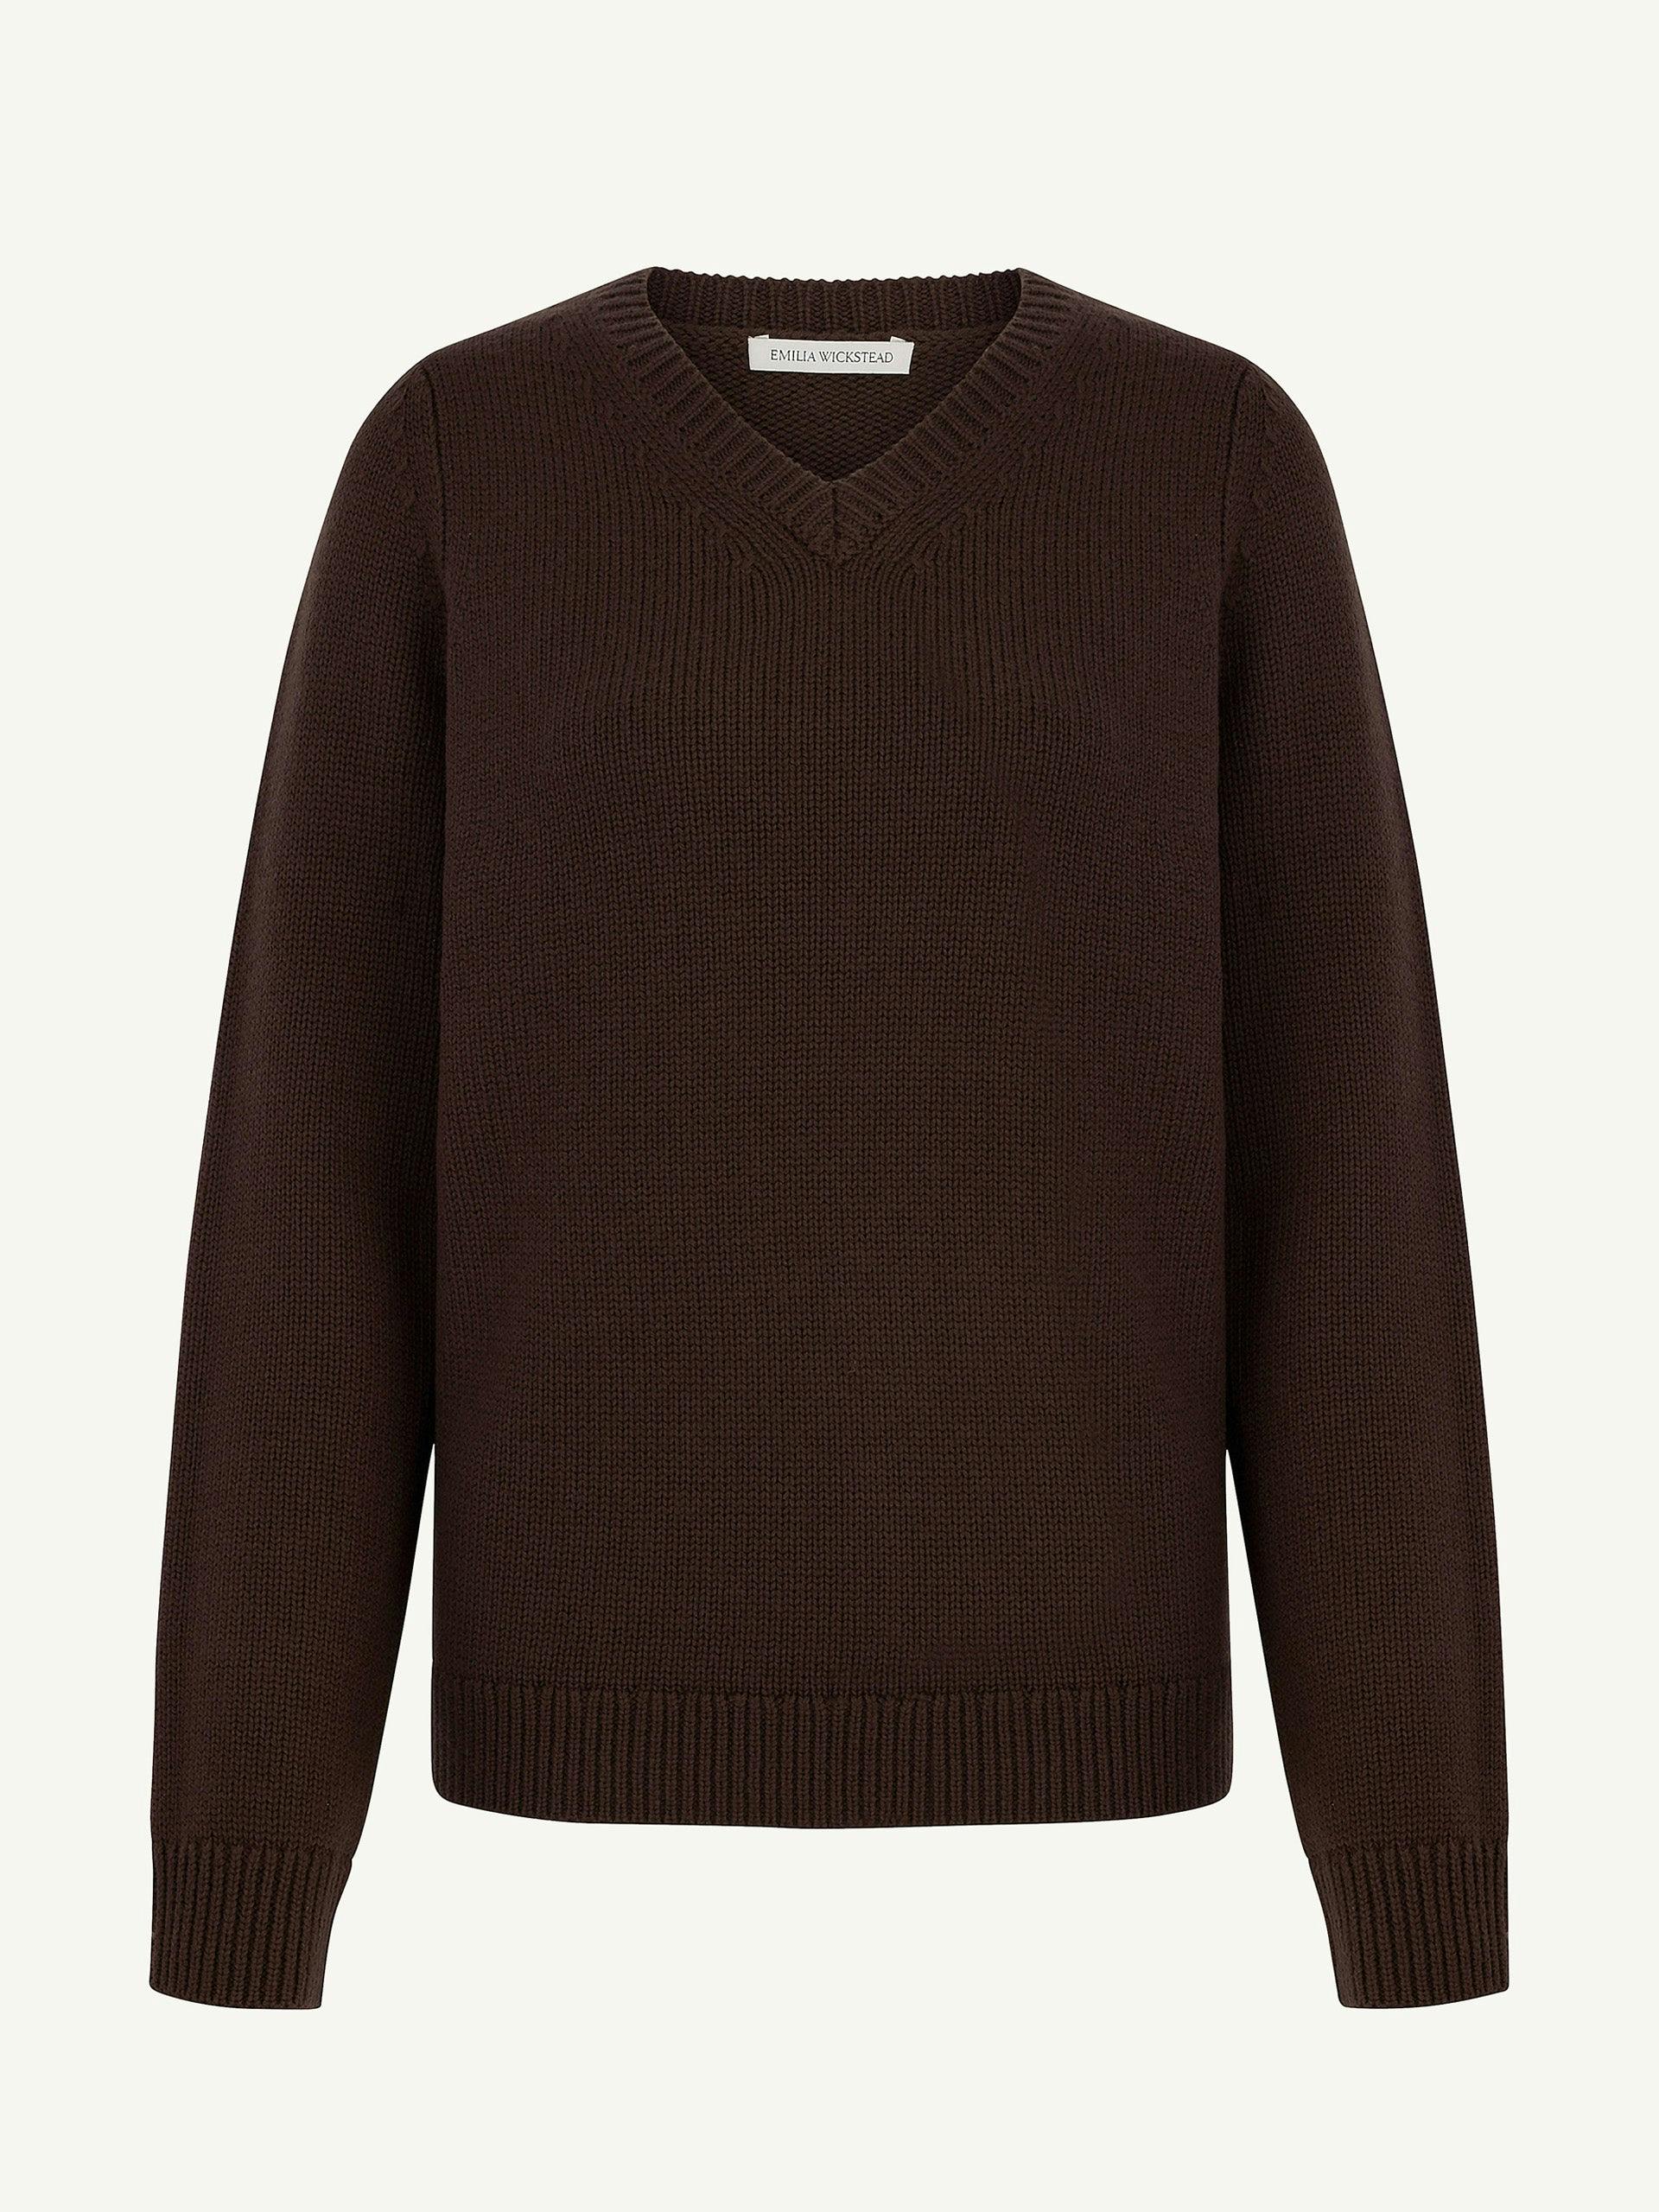 Pace brown knitted jumper